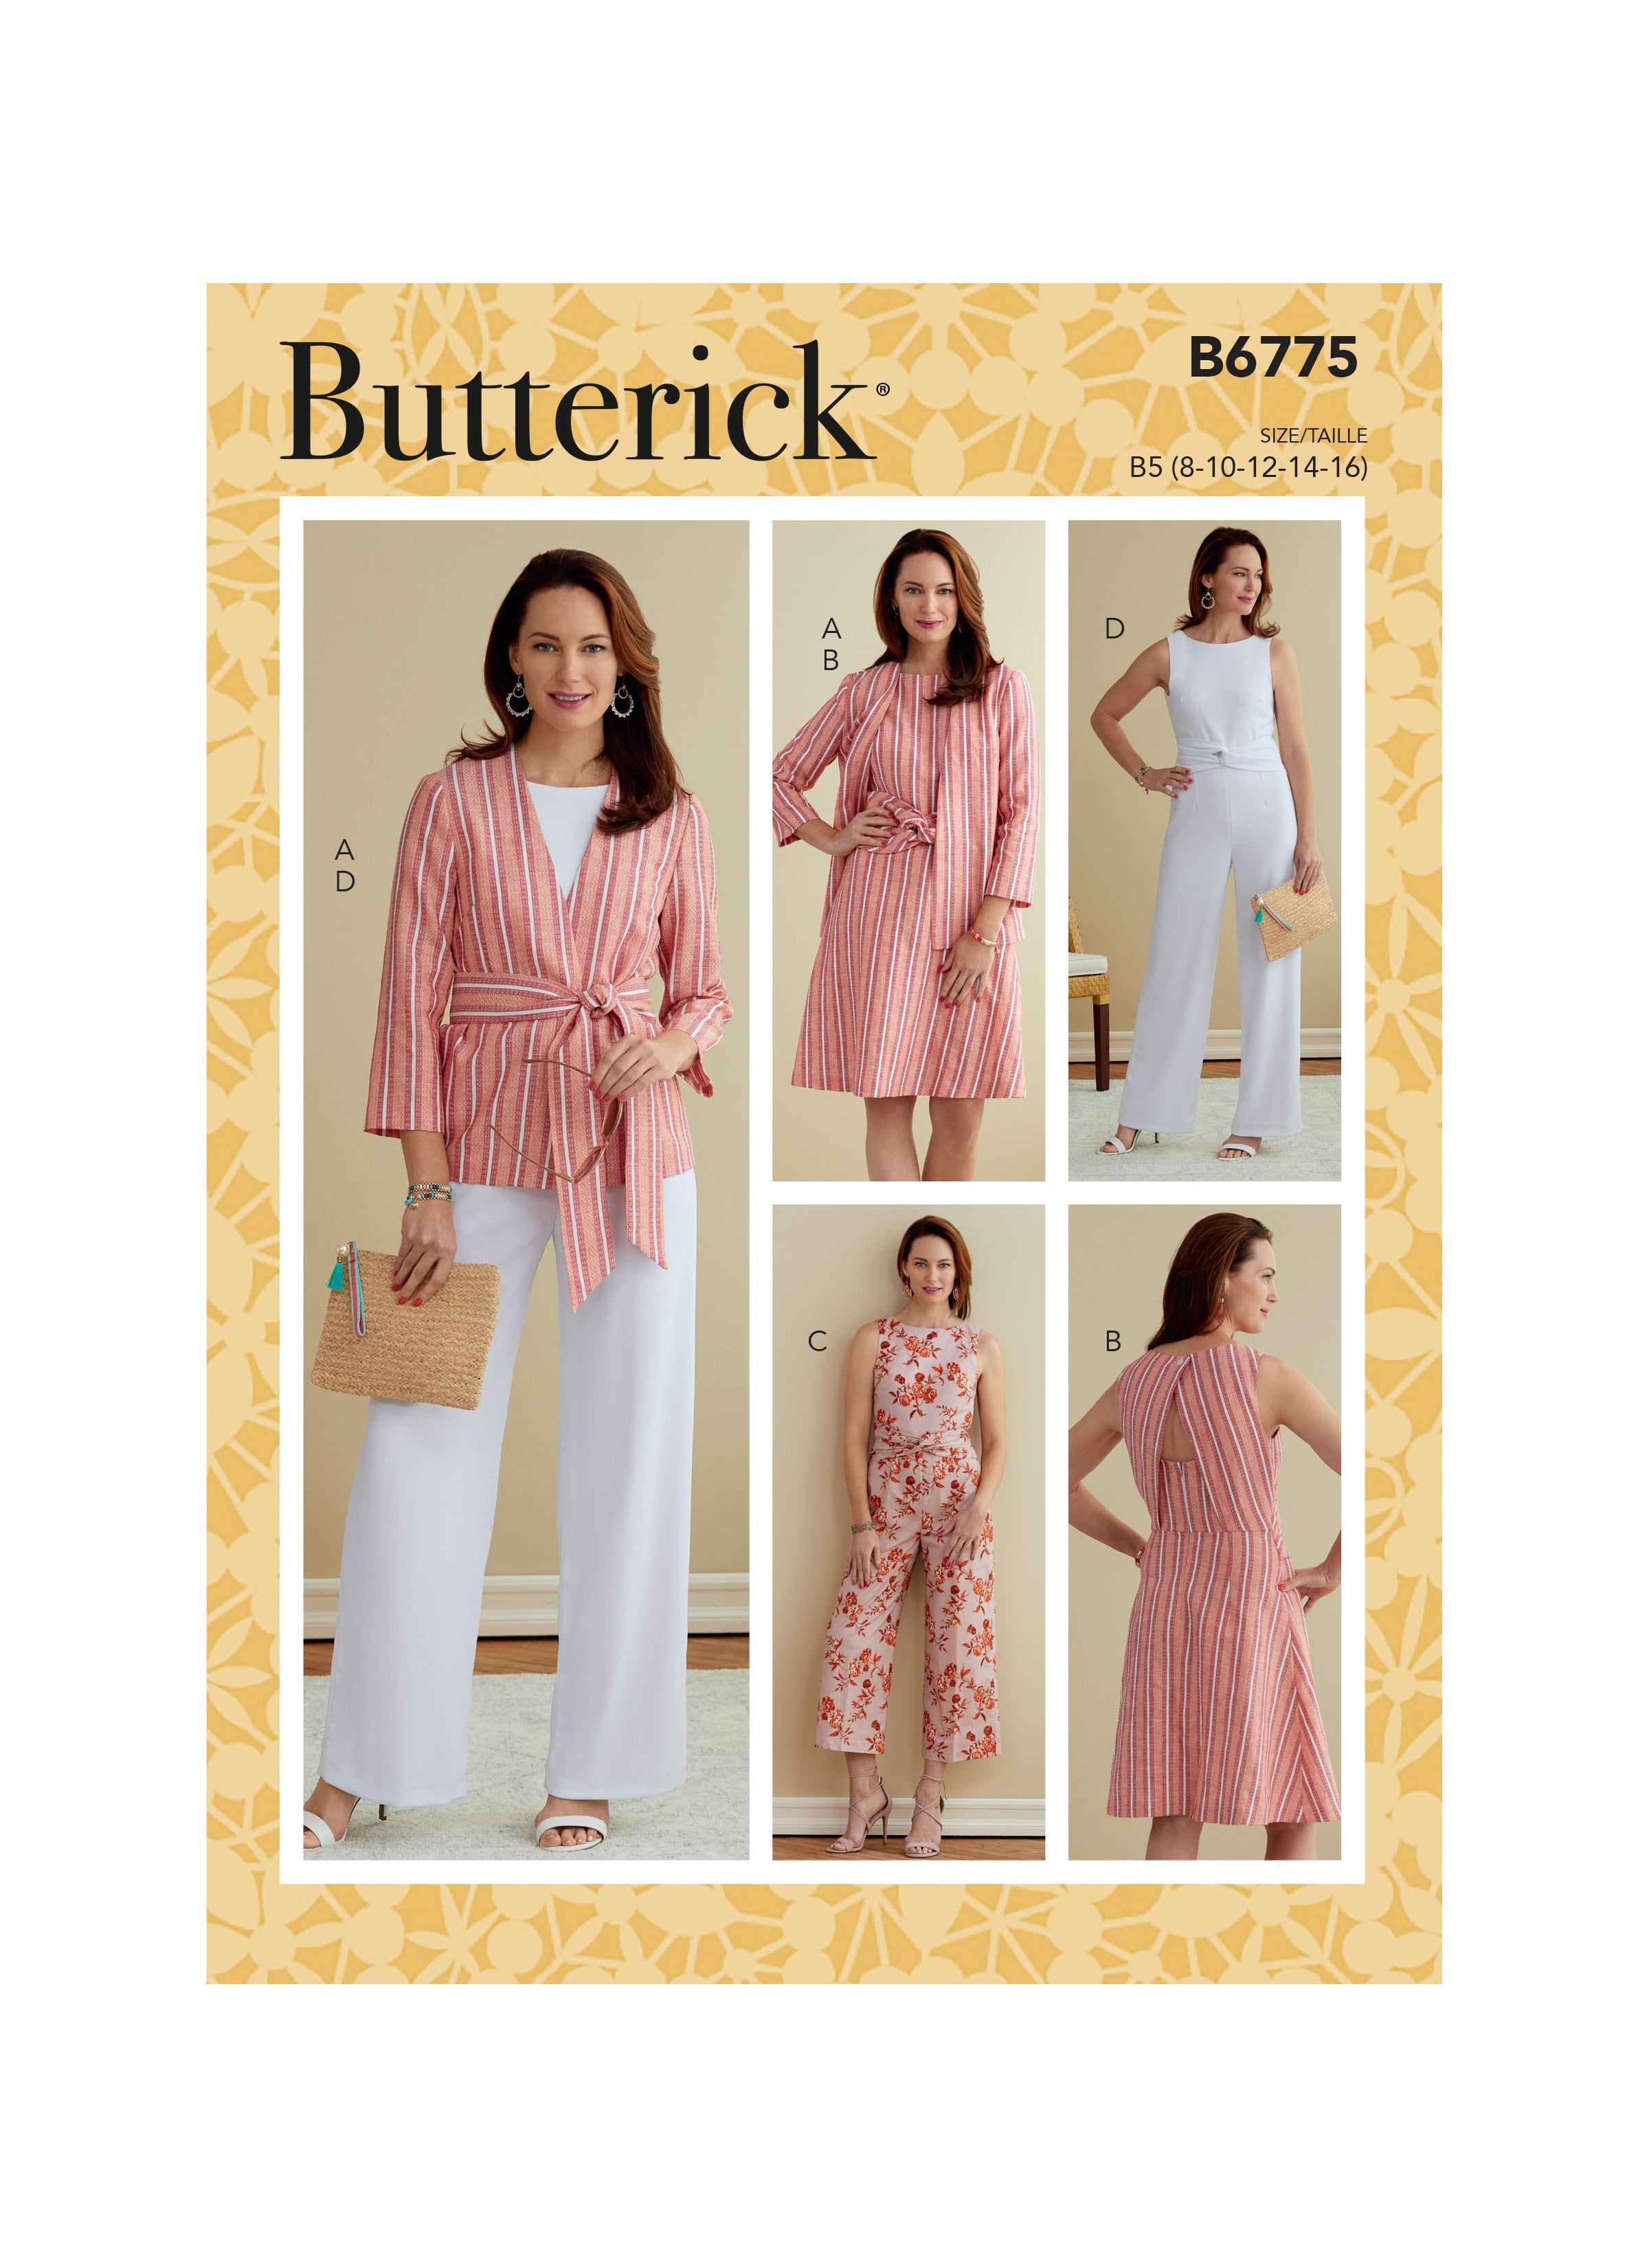 Butterick sewing pattern 6775 Jacket, Dress and Jumpsuits from Jaycotts Sewing Supplies